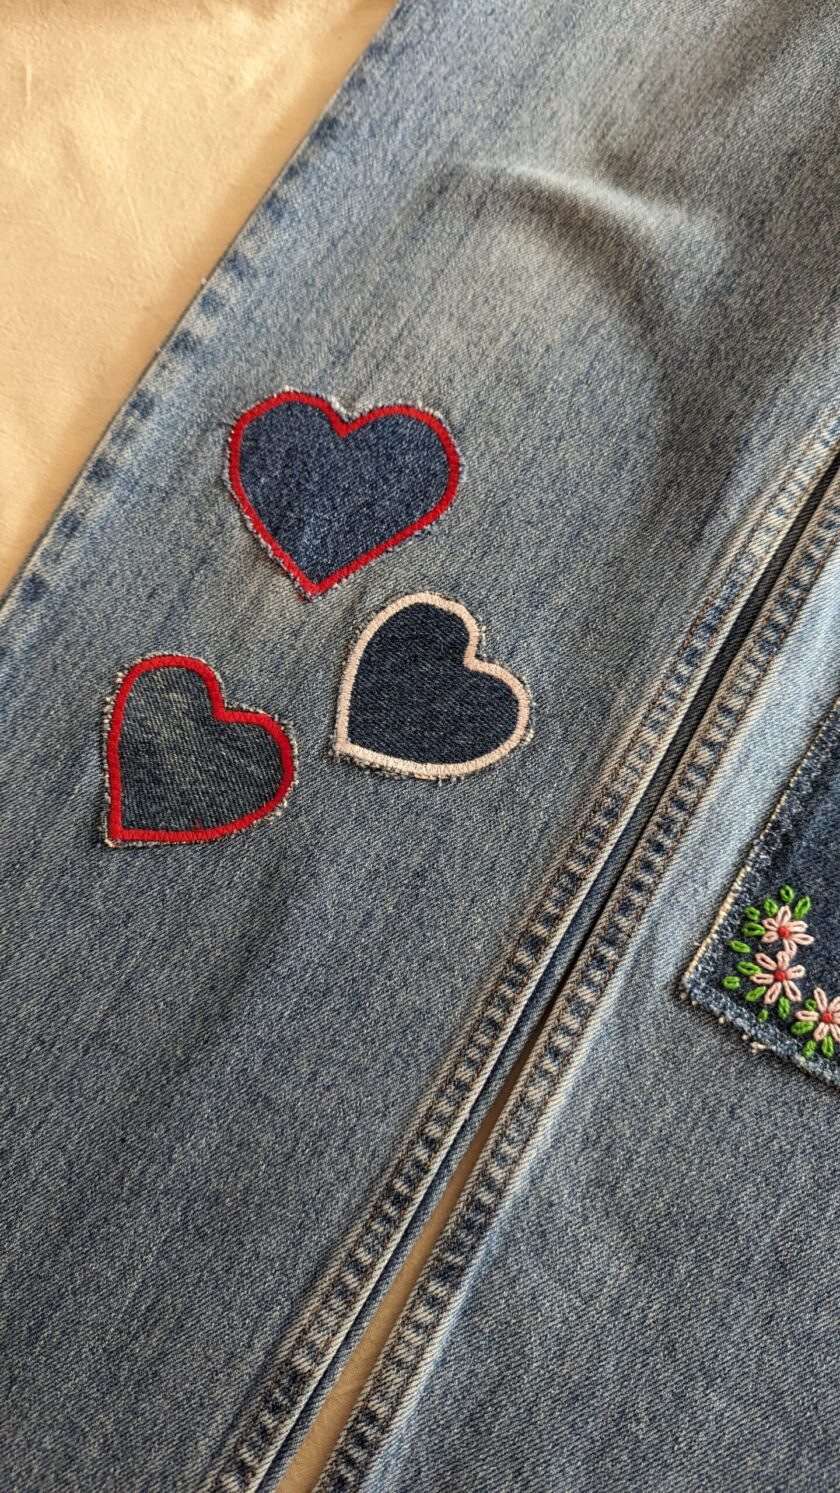 A pair of jeans with hearts embroidered on them.